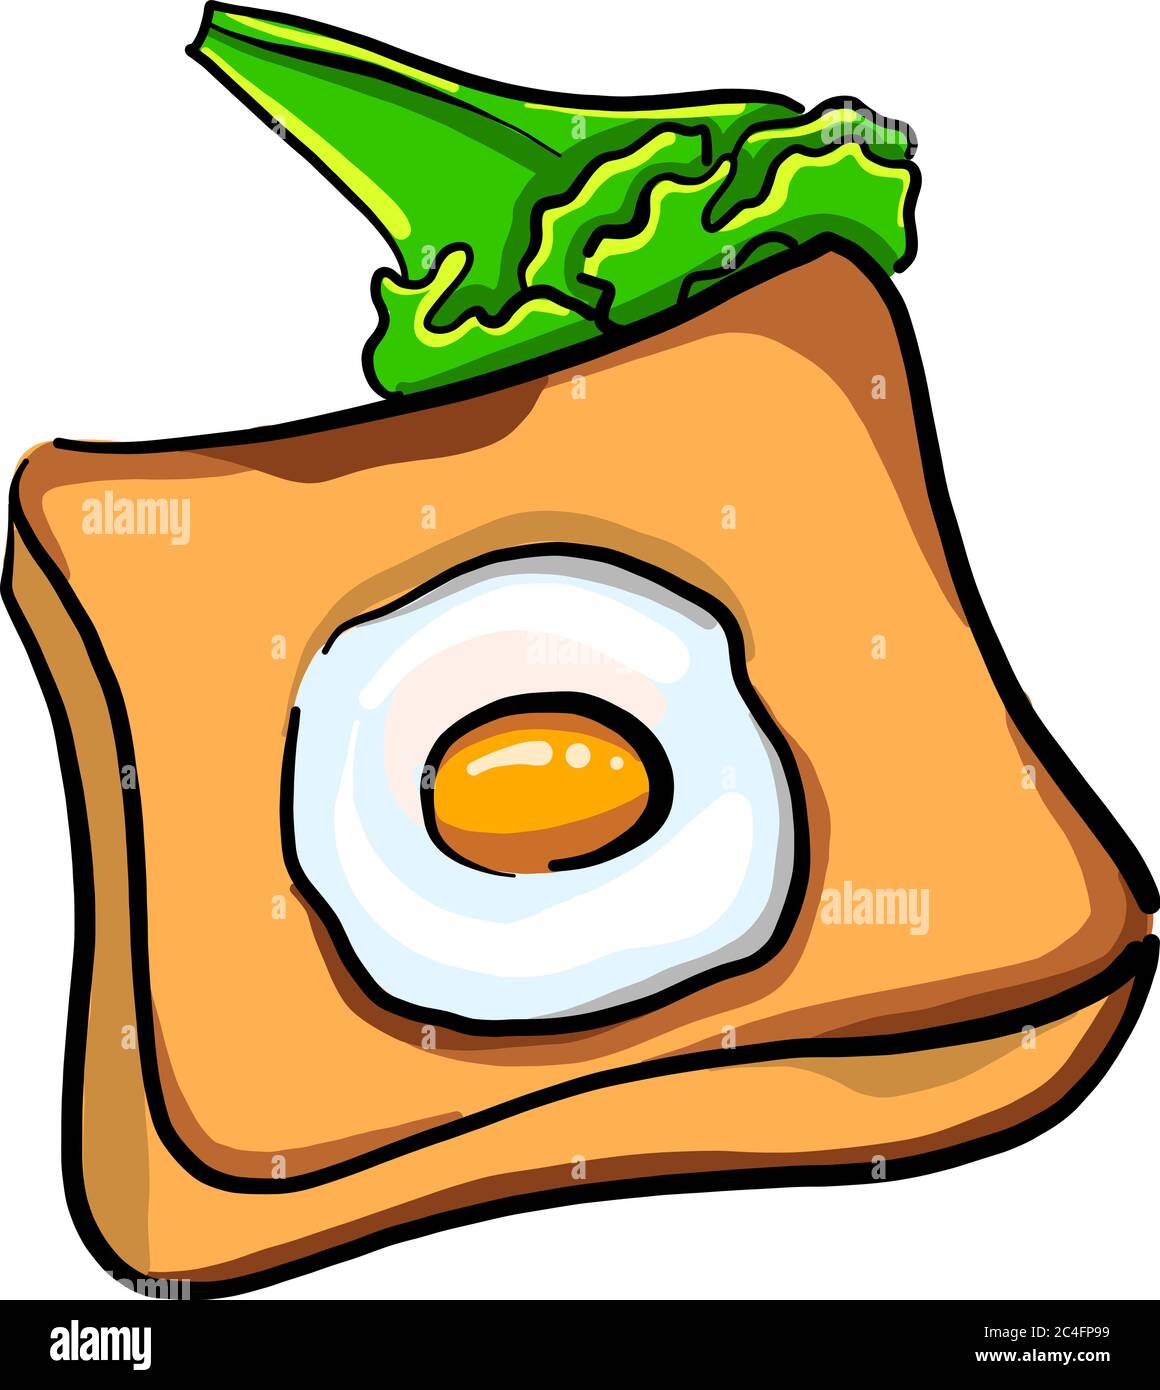 Fried eggs with on bread, illustration, vector on white background Stock Vector